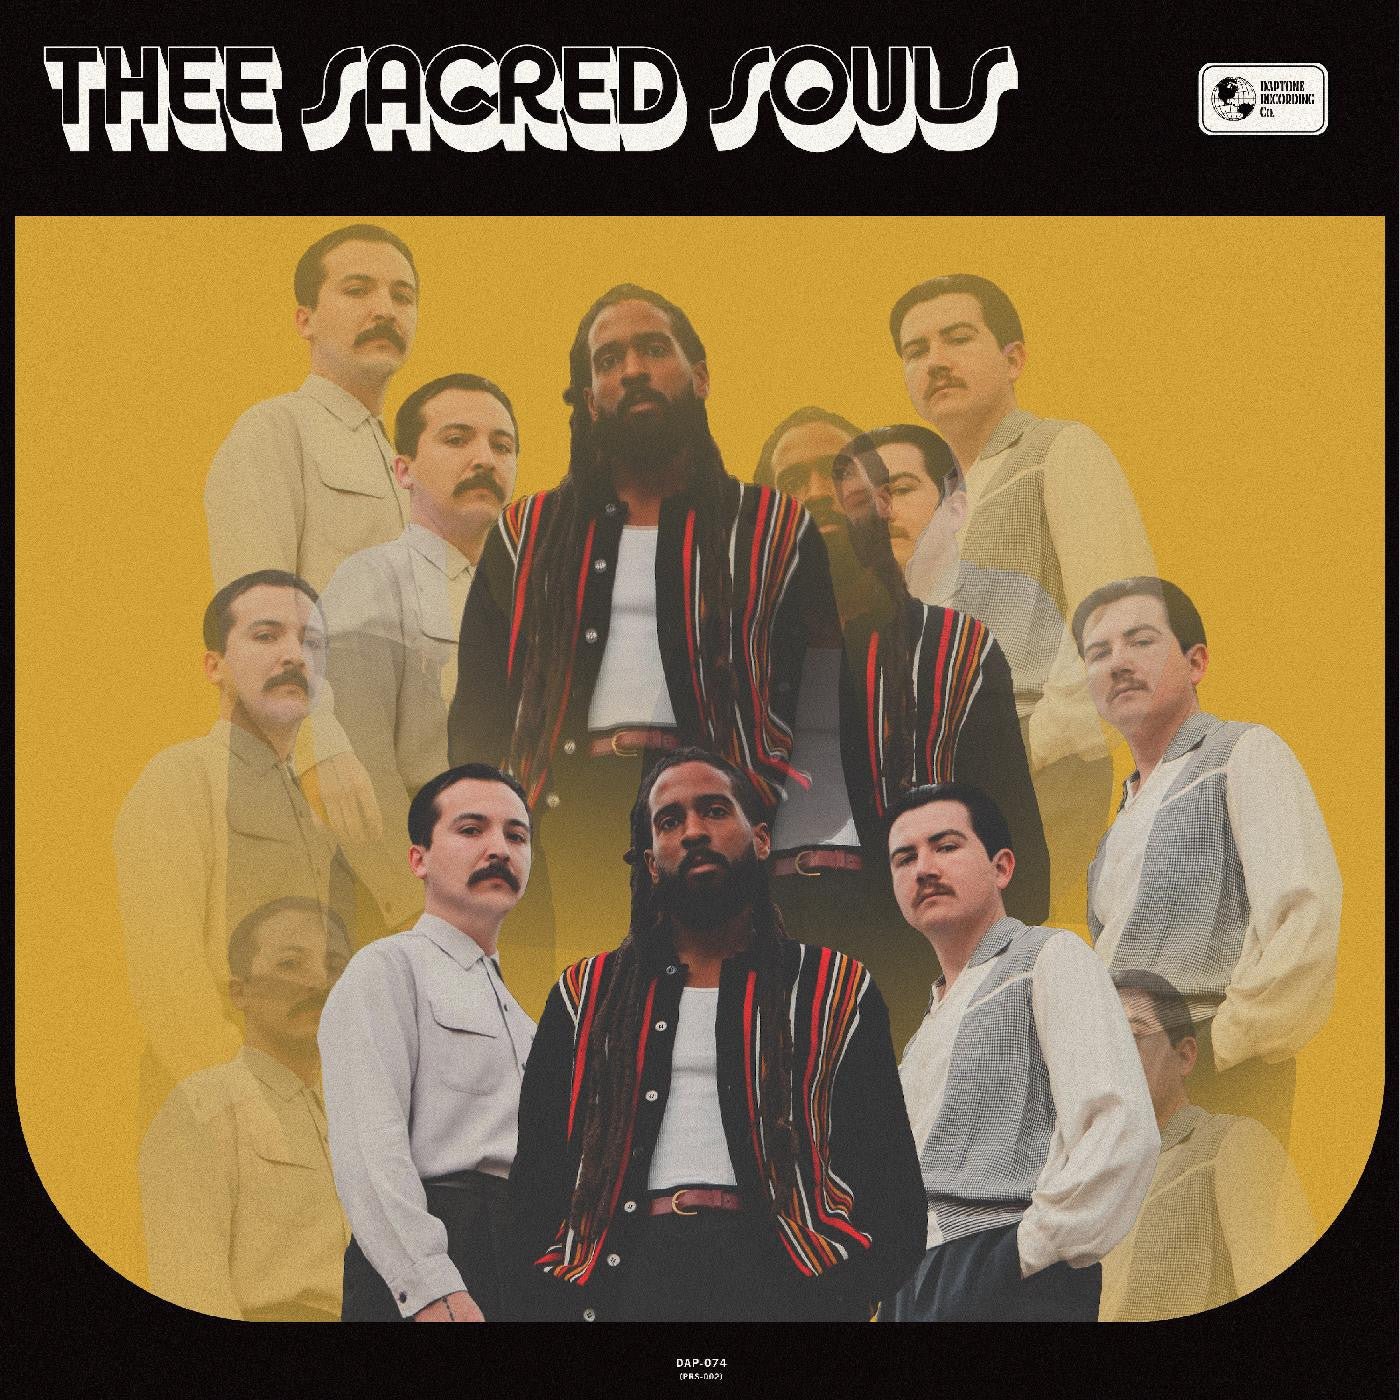 Thee Sacred Souls - Thee Sacred Souls (Indie Exclusive, Icy Blue Vinyl) - 823134907416 - LP's - Yellow Racket Records